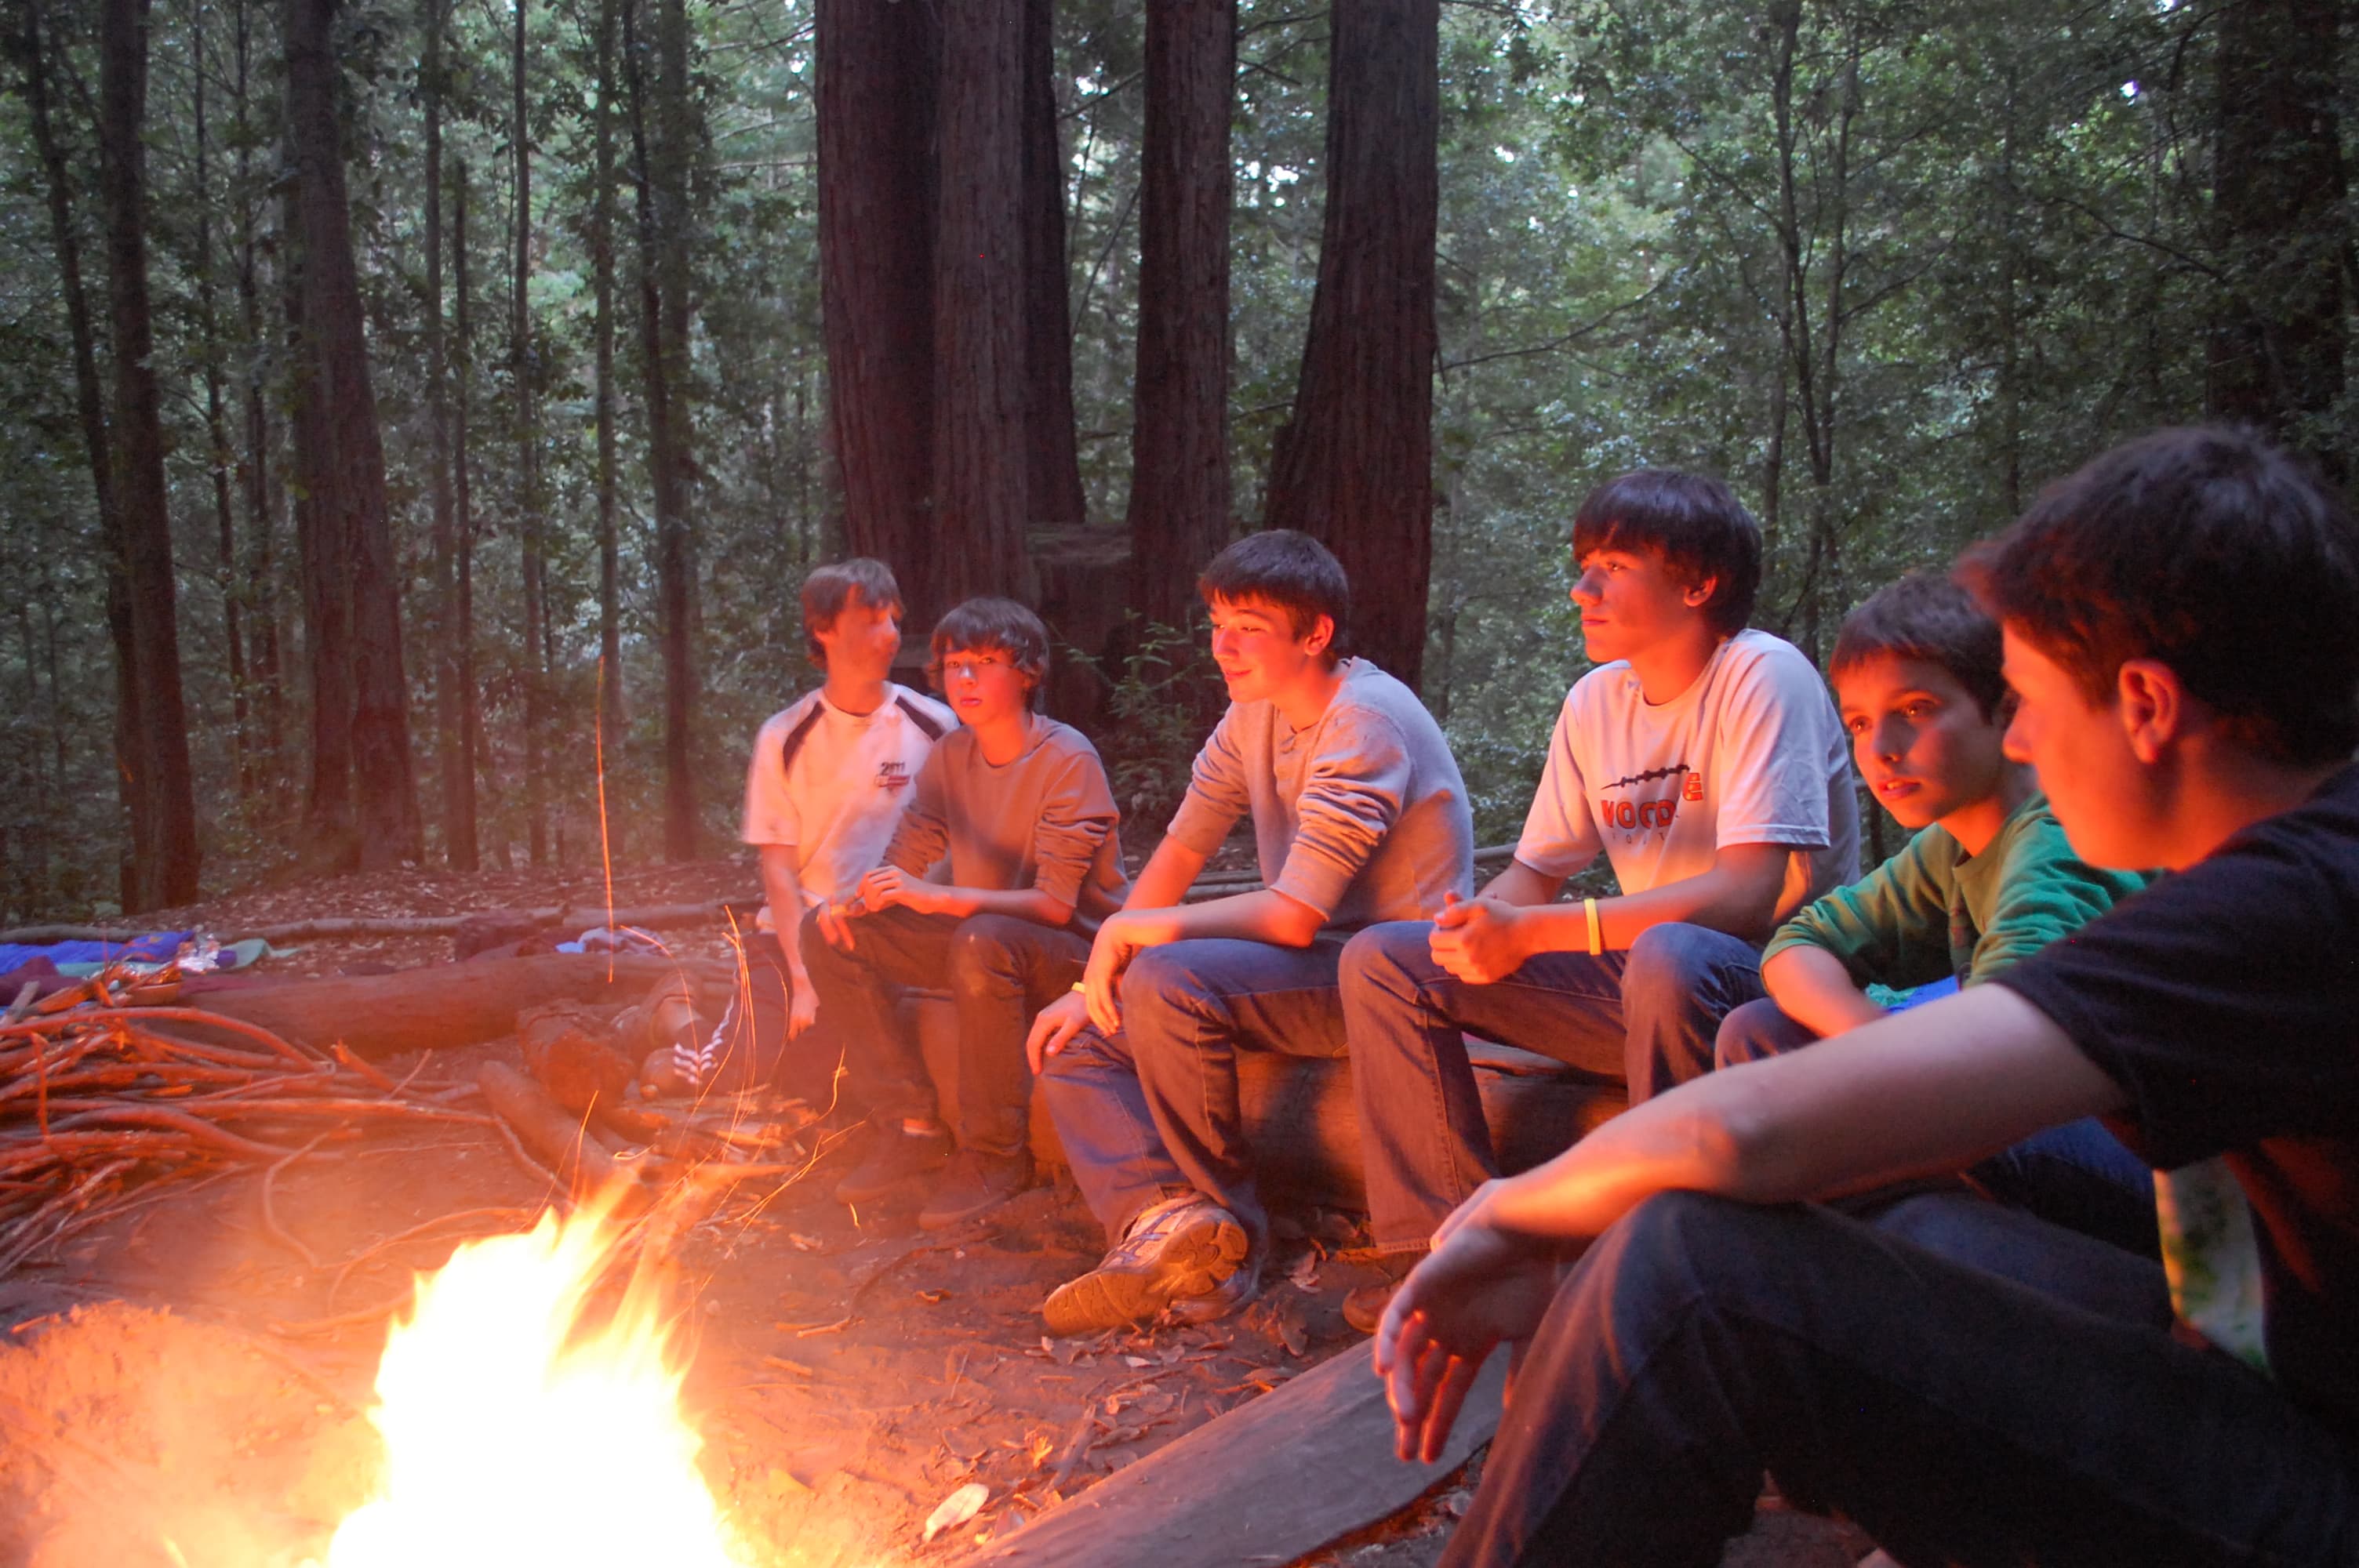 A row of boys sit on logs looking at the campfire